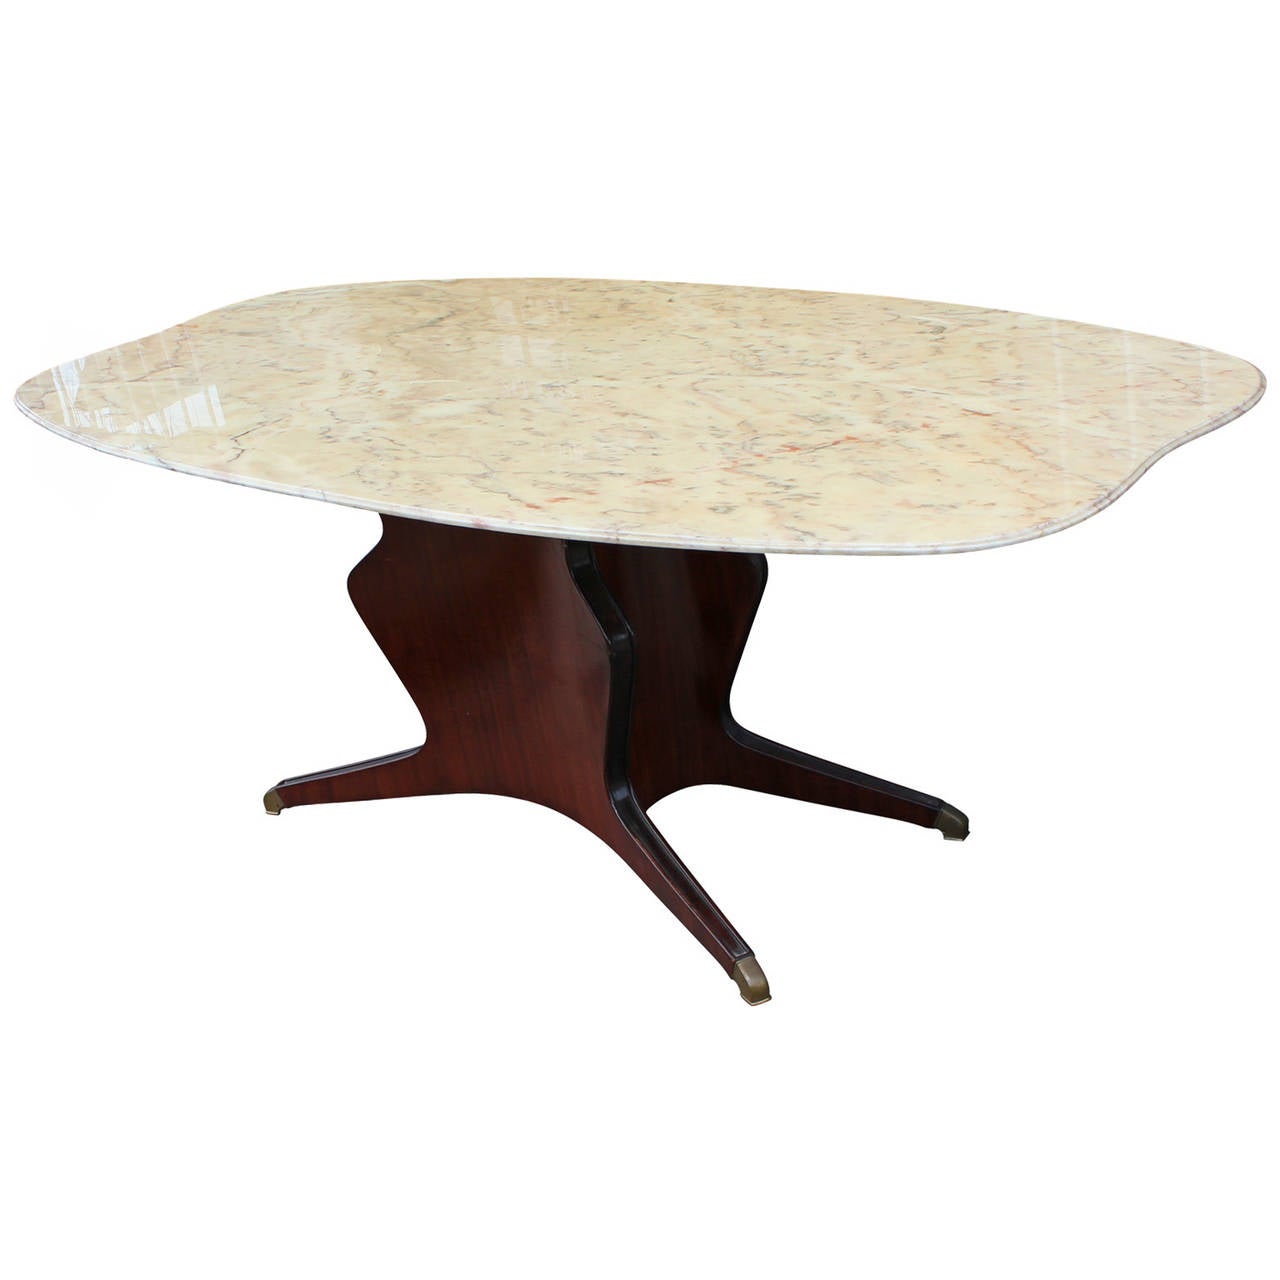 Sculptural Dining or Center table by Osvaldo Borsani Circa 1950. Table sits atop a rosewood base with nice piece of marble on top. Table in is Excellent vintage condition.